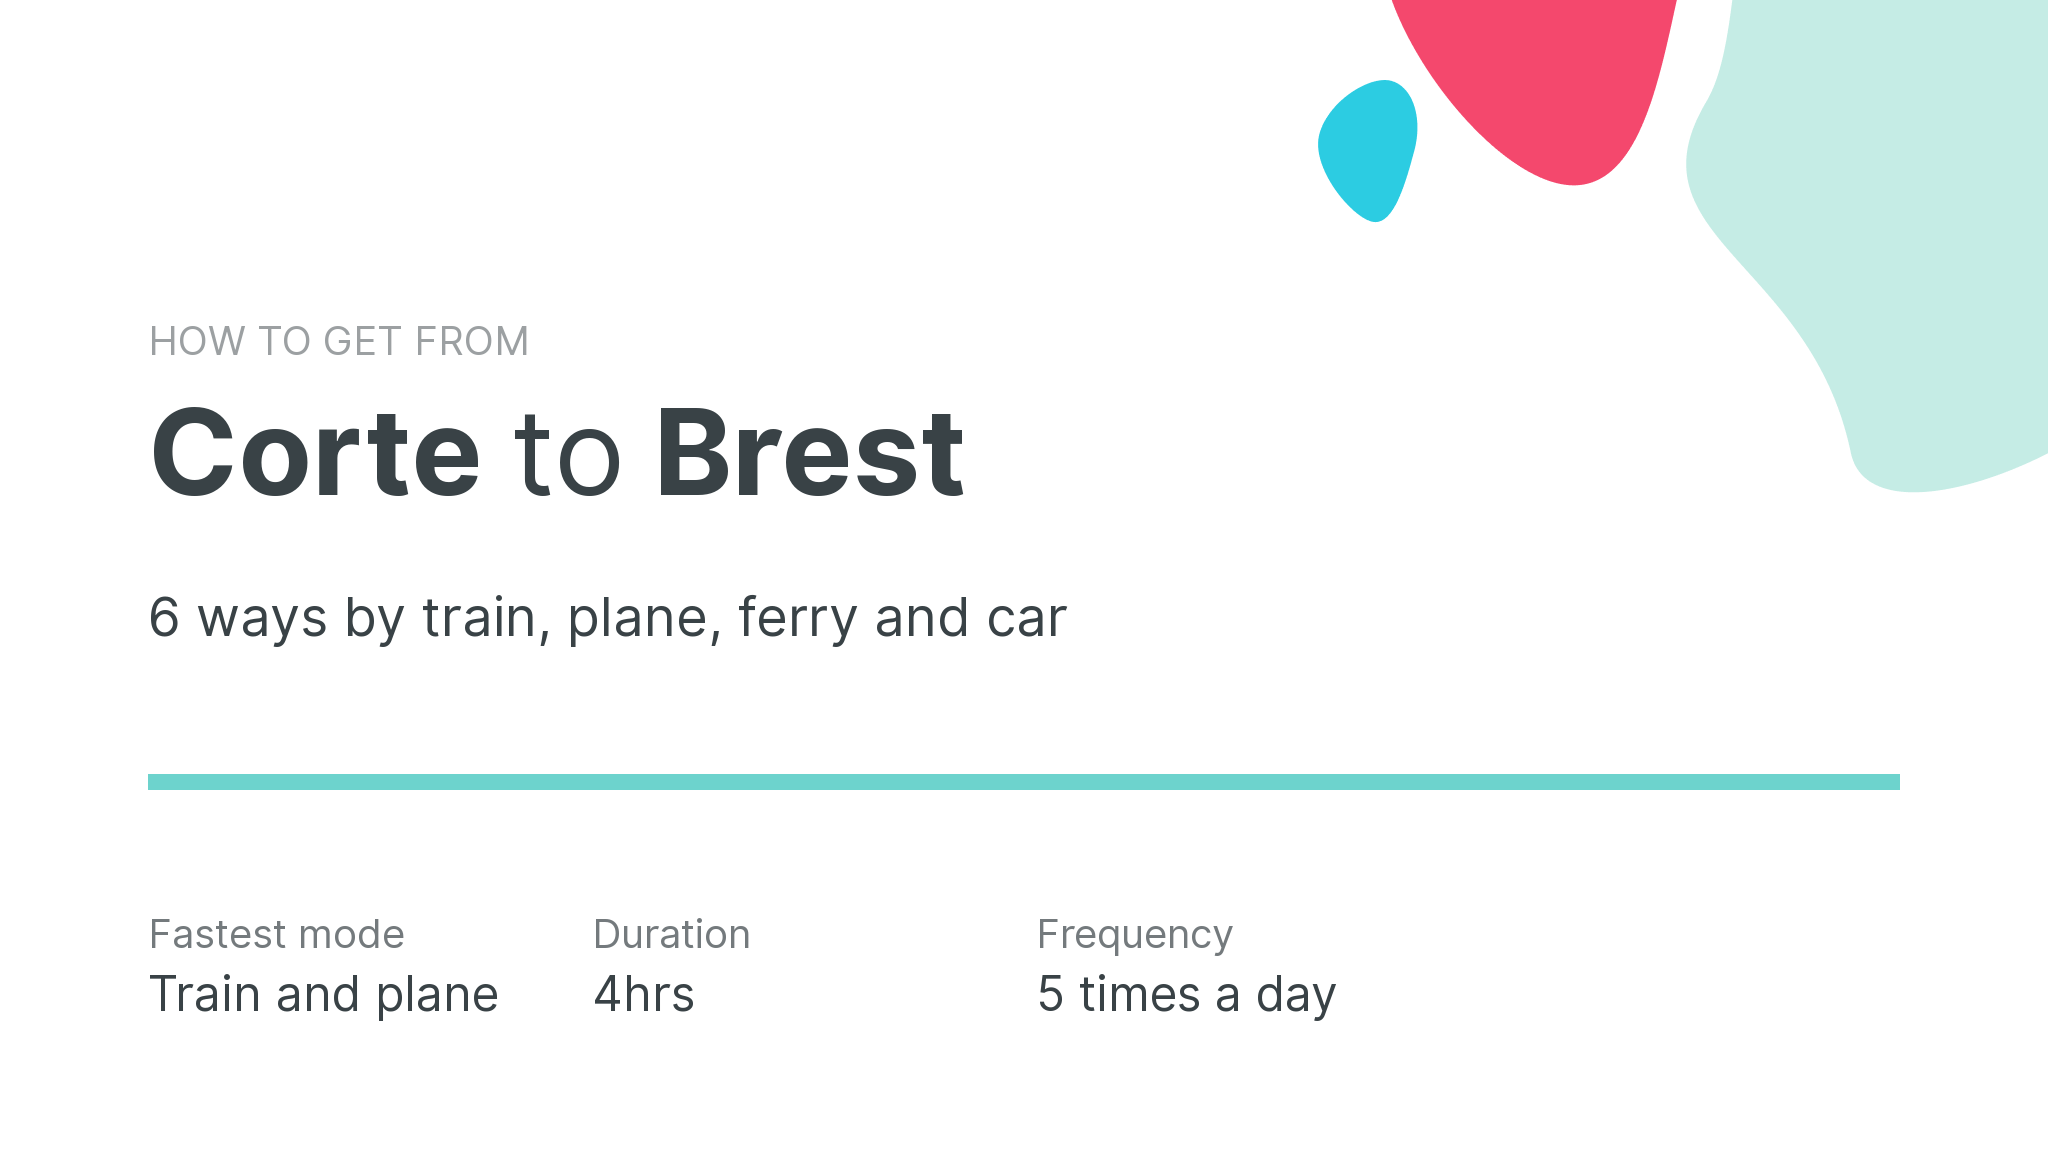 How do I get from Corte to Brest